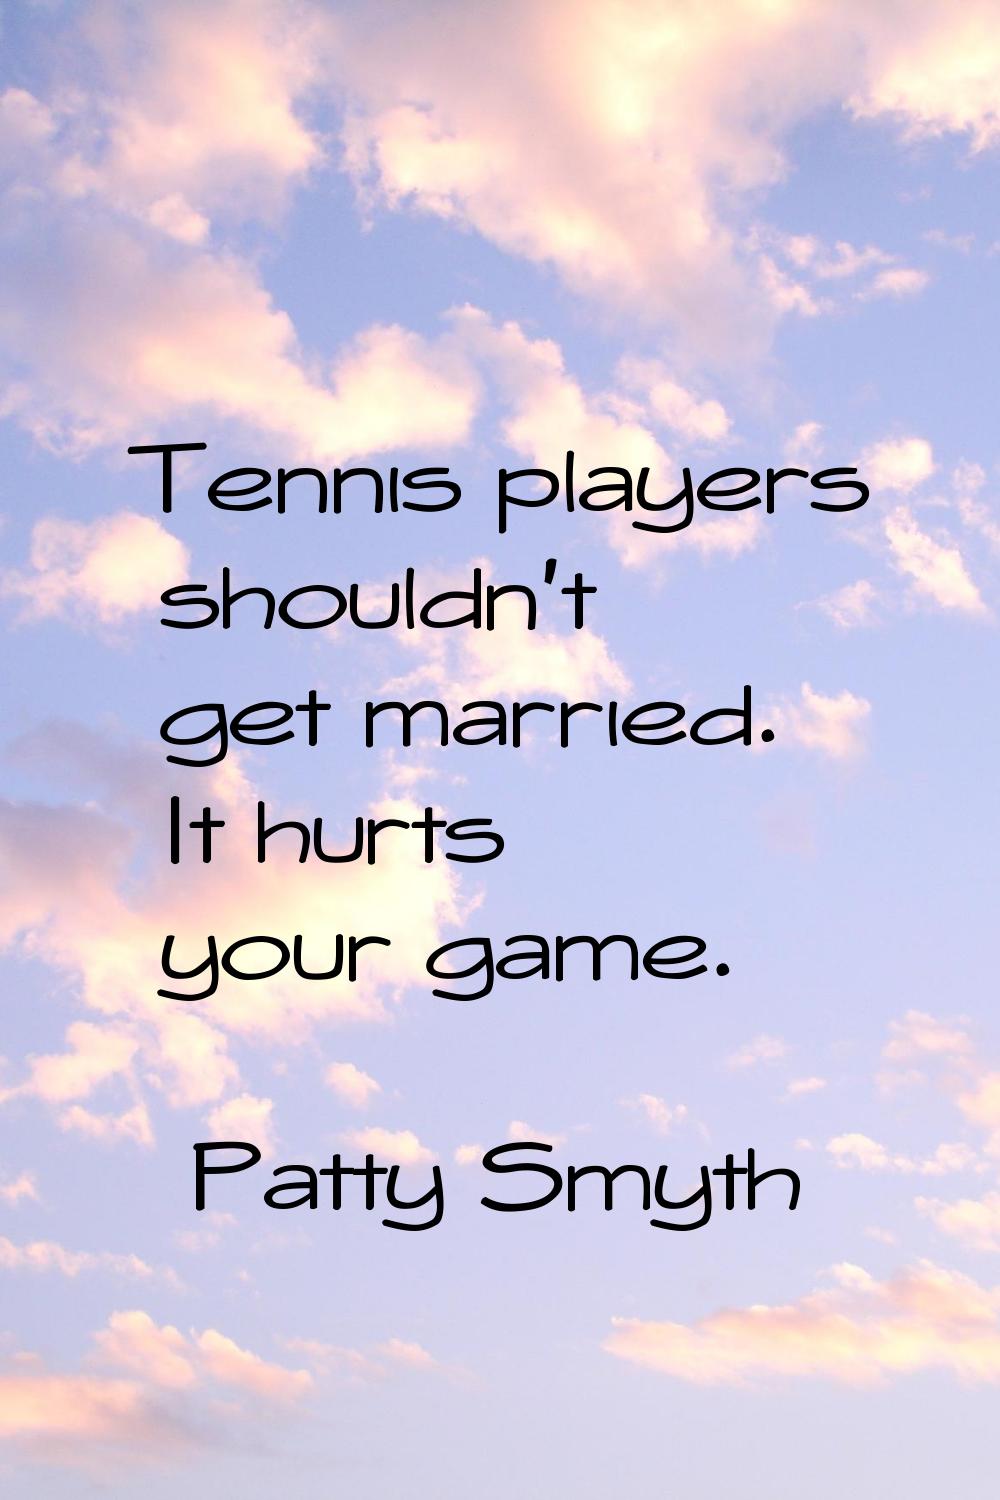 Tennis players shouldn't get married. It hurts your game.